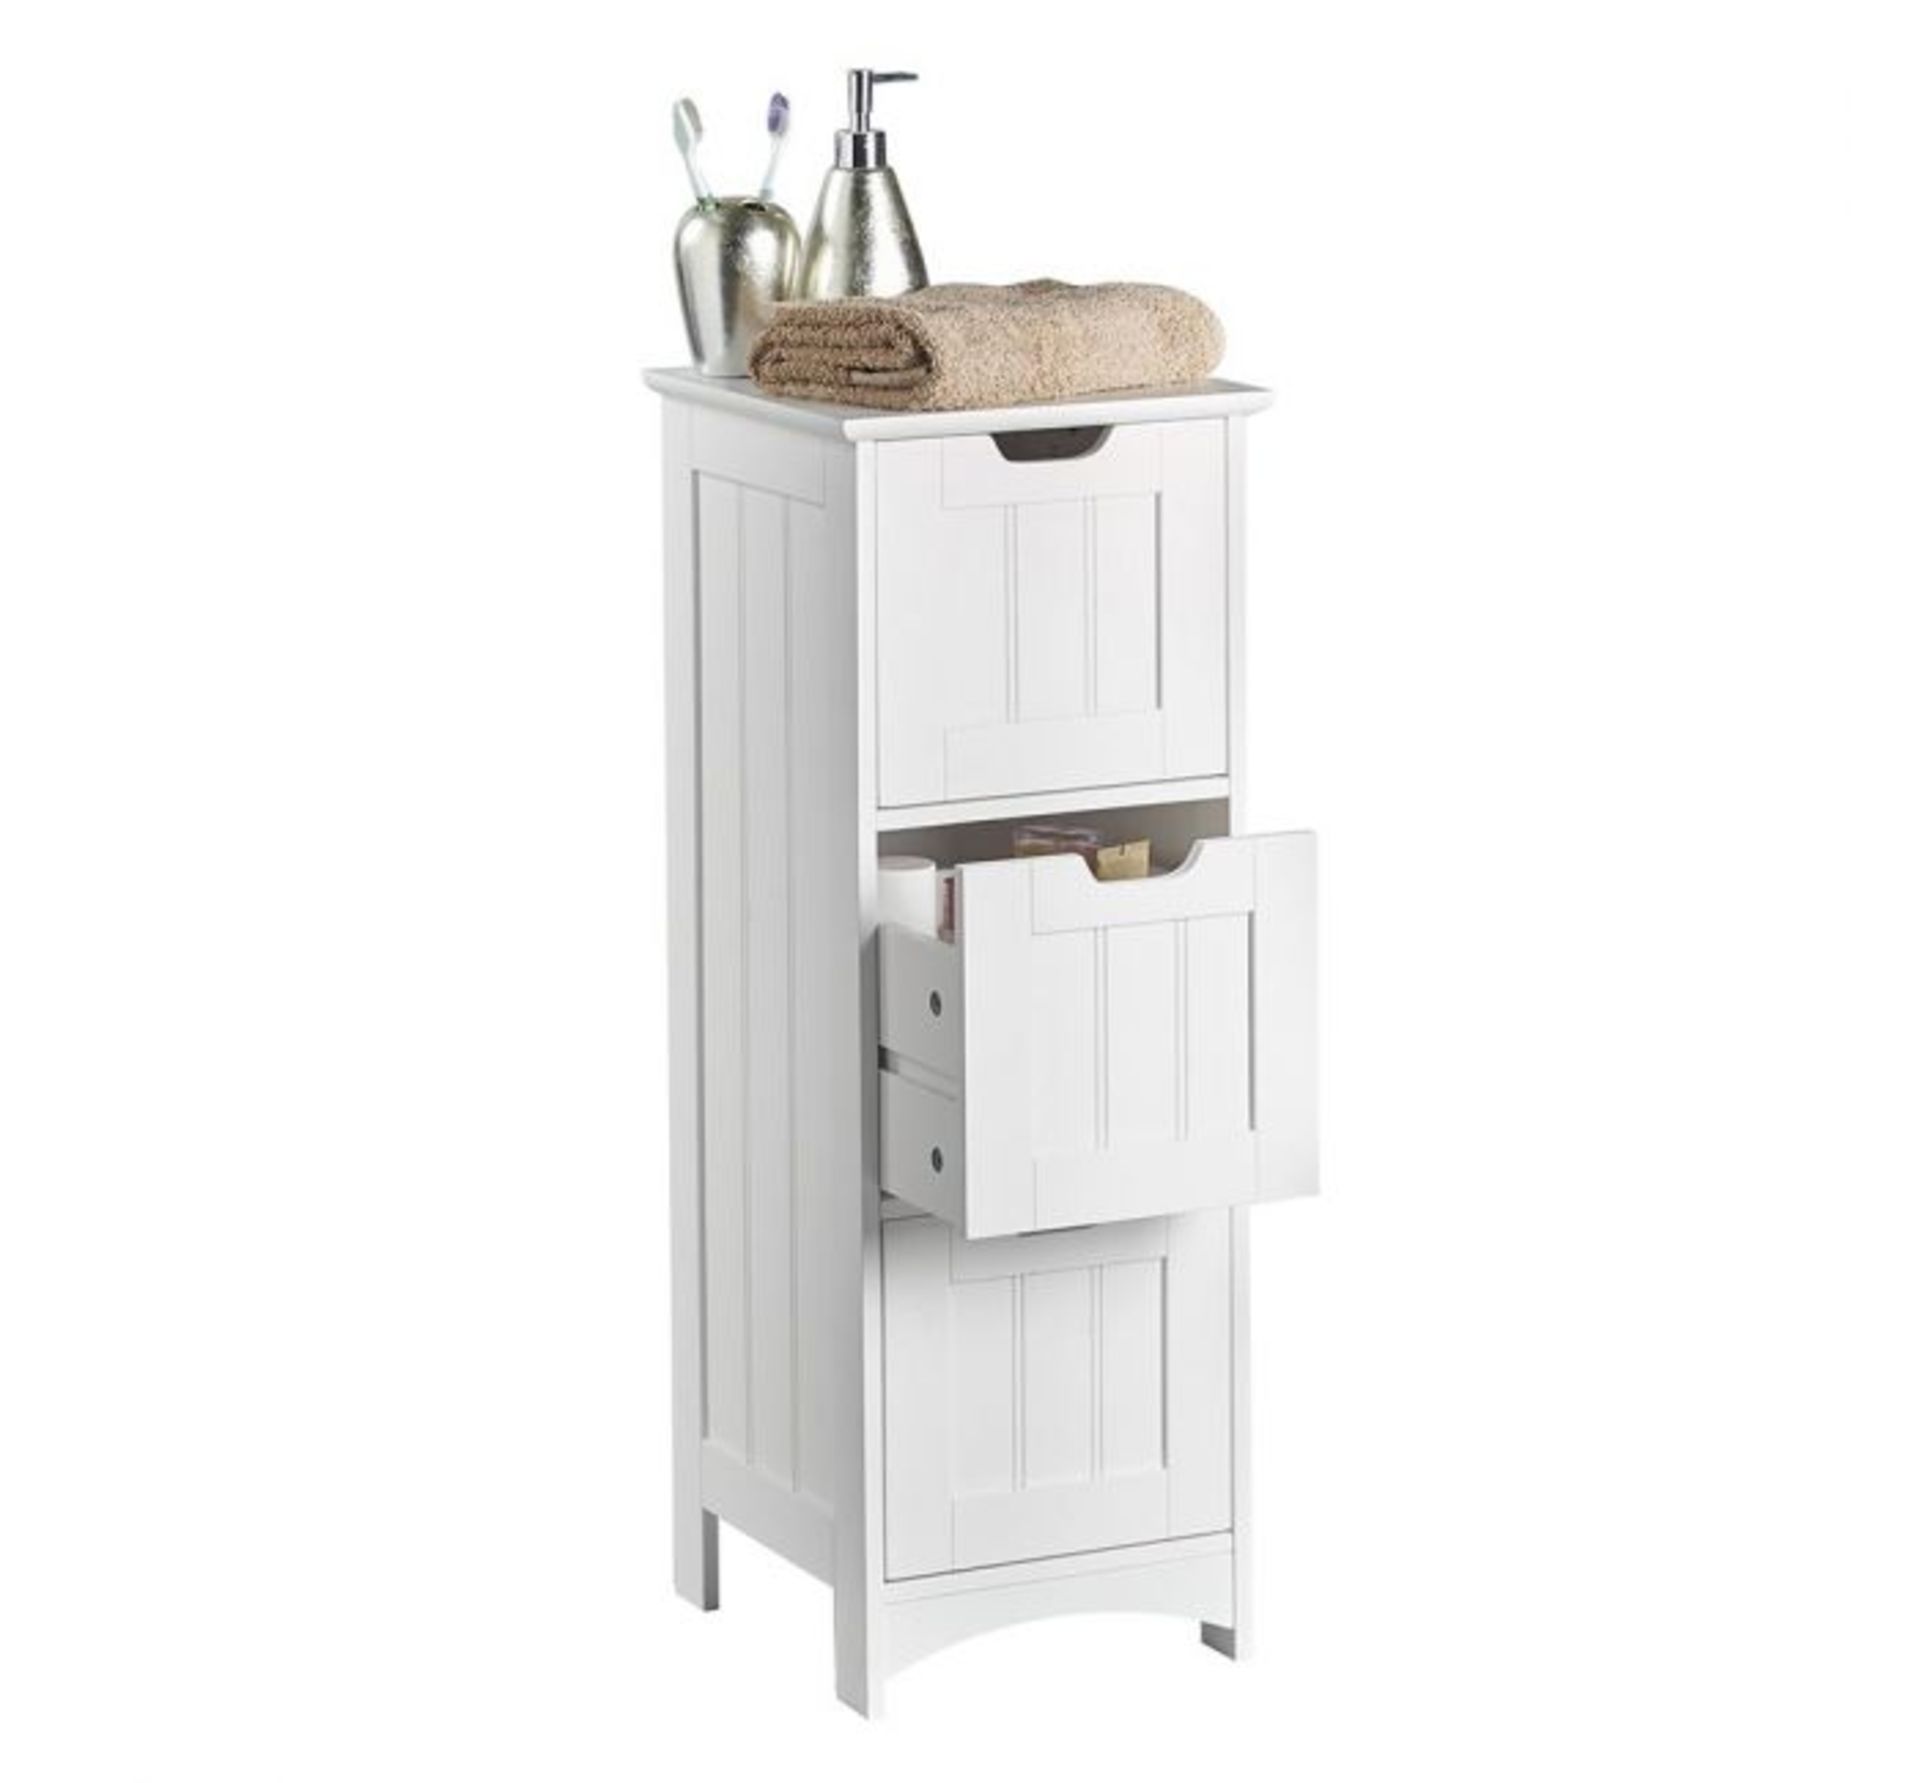 (TD147) Colonial 3 Drawer Storage Unit MDF with white painted finish Water resistant & easy t... - Image 3 of 3